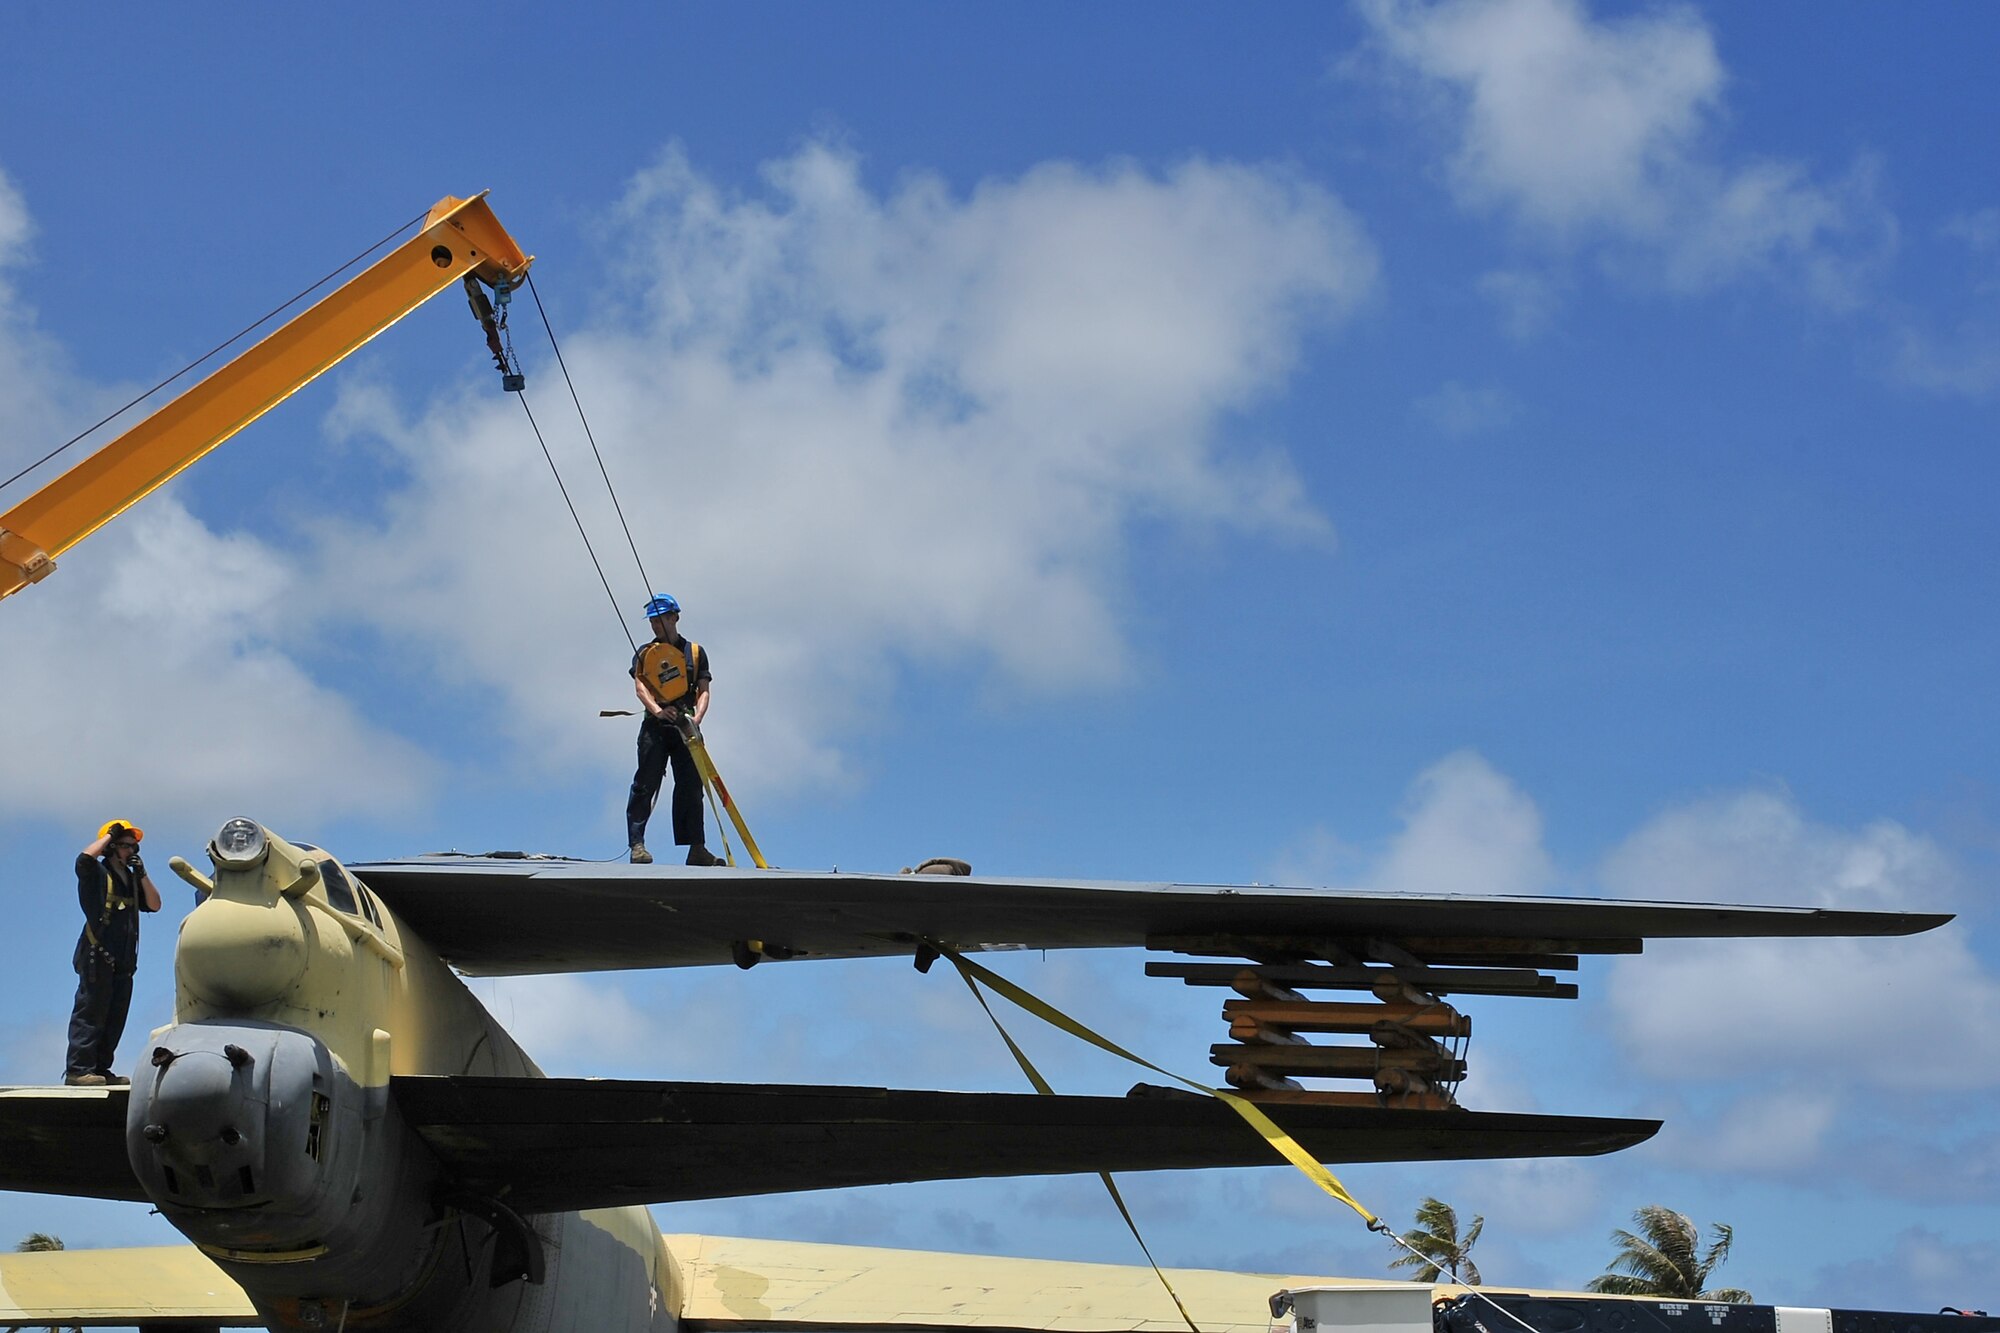 Airmen from the 36th Maintenance Squadron dismantle the vertical tail of the “Old-100” static display B-52D Stratofortress at Arc Light Memorial Park on Andersen Air Force Base, Guam, March 22, 2014. The aircraft is being removed due to irreparable deterioration.  The vertical tail section is being preserved and will play a key part in the redesigned memorial site at the park when the project is completed. (U.S. Air Force photo by Staff Sgt. Melissa B. White/Released)